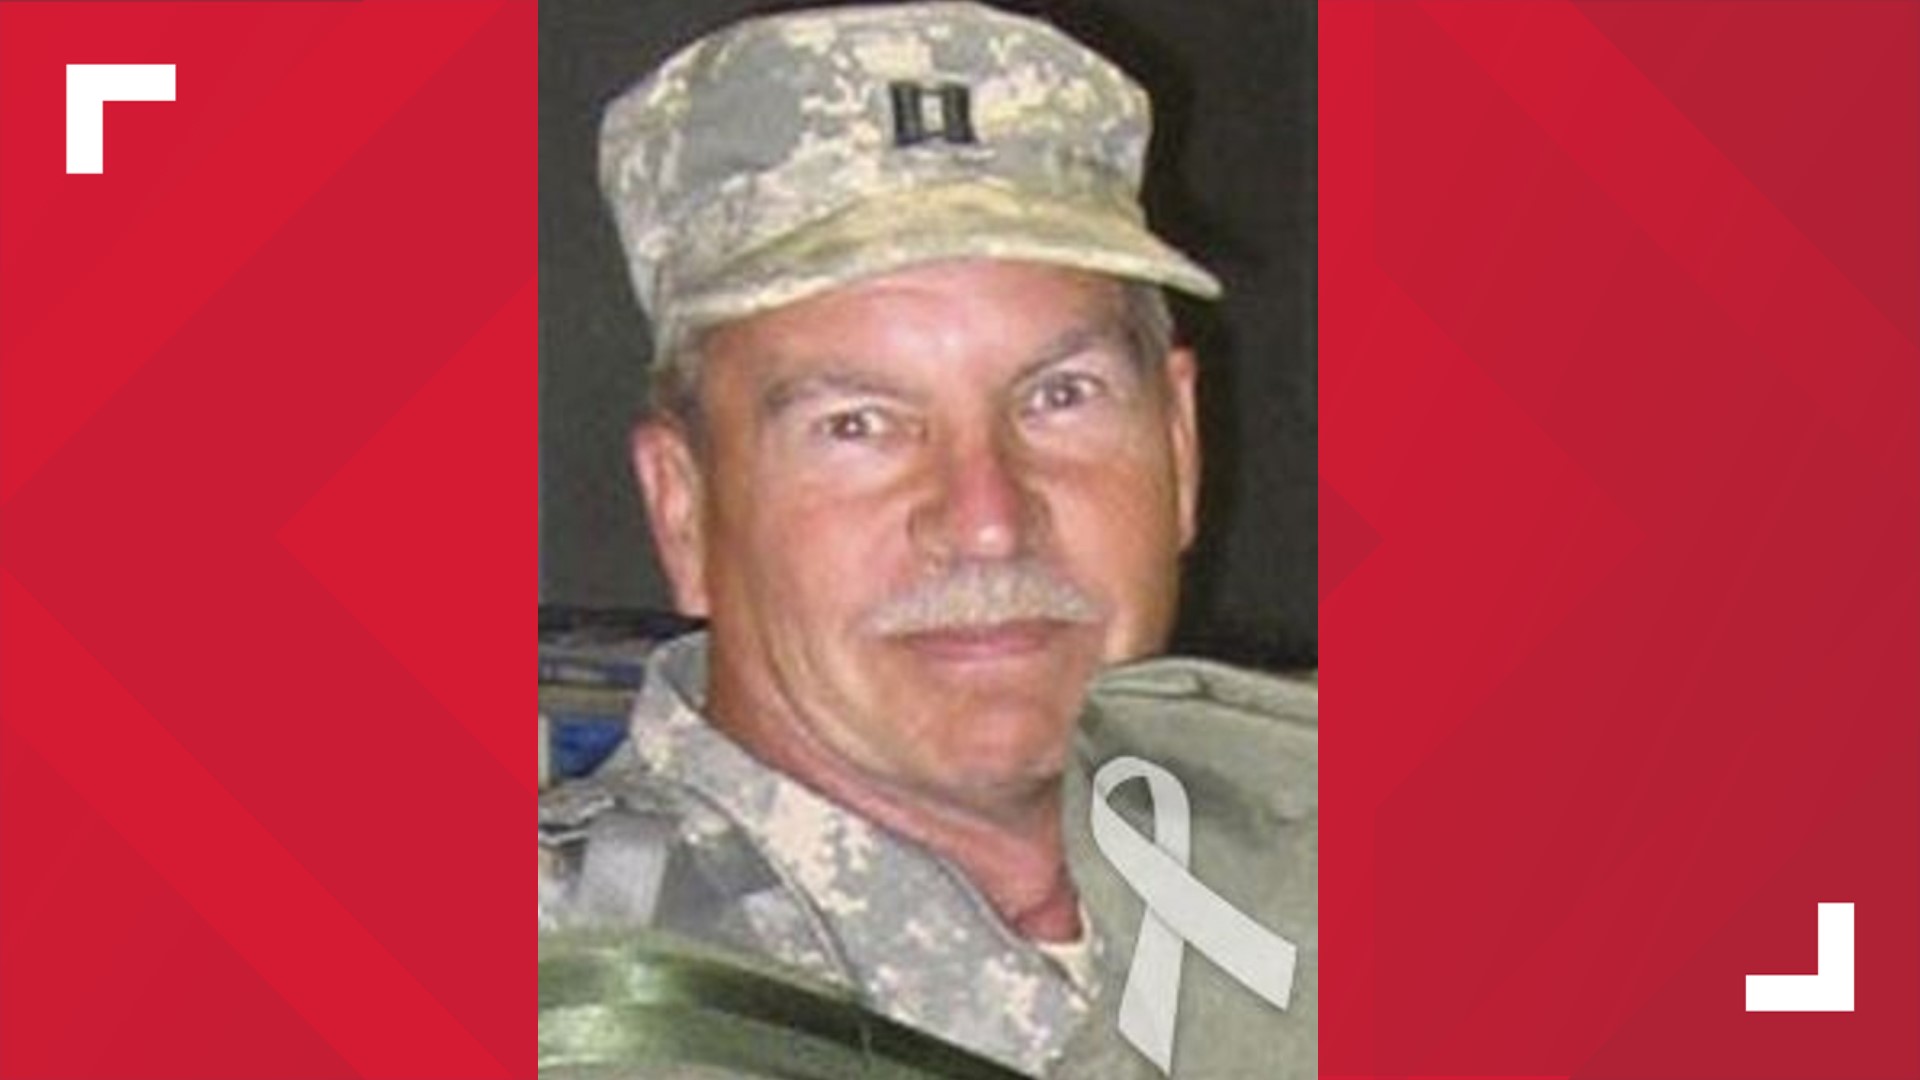 Cpt. John Gaffaney was killed in a mass shooting on Ft. Hood on Nov. 5, 2009. It was the worst domestic terrorist attack on a military installation.